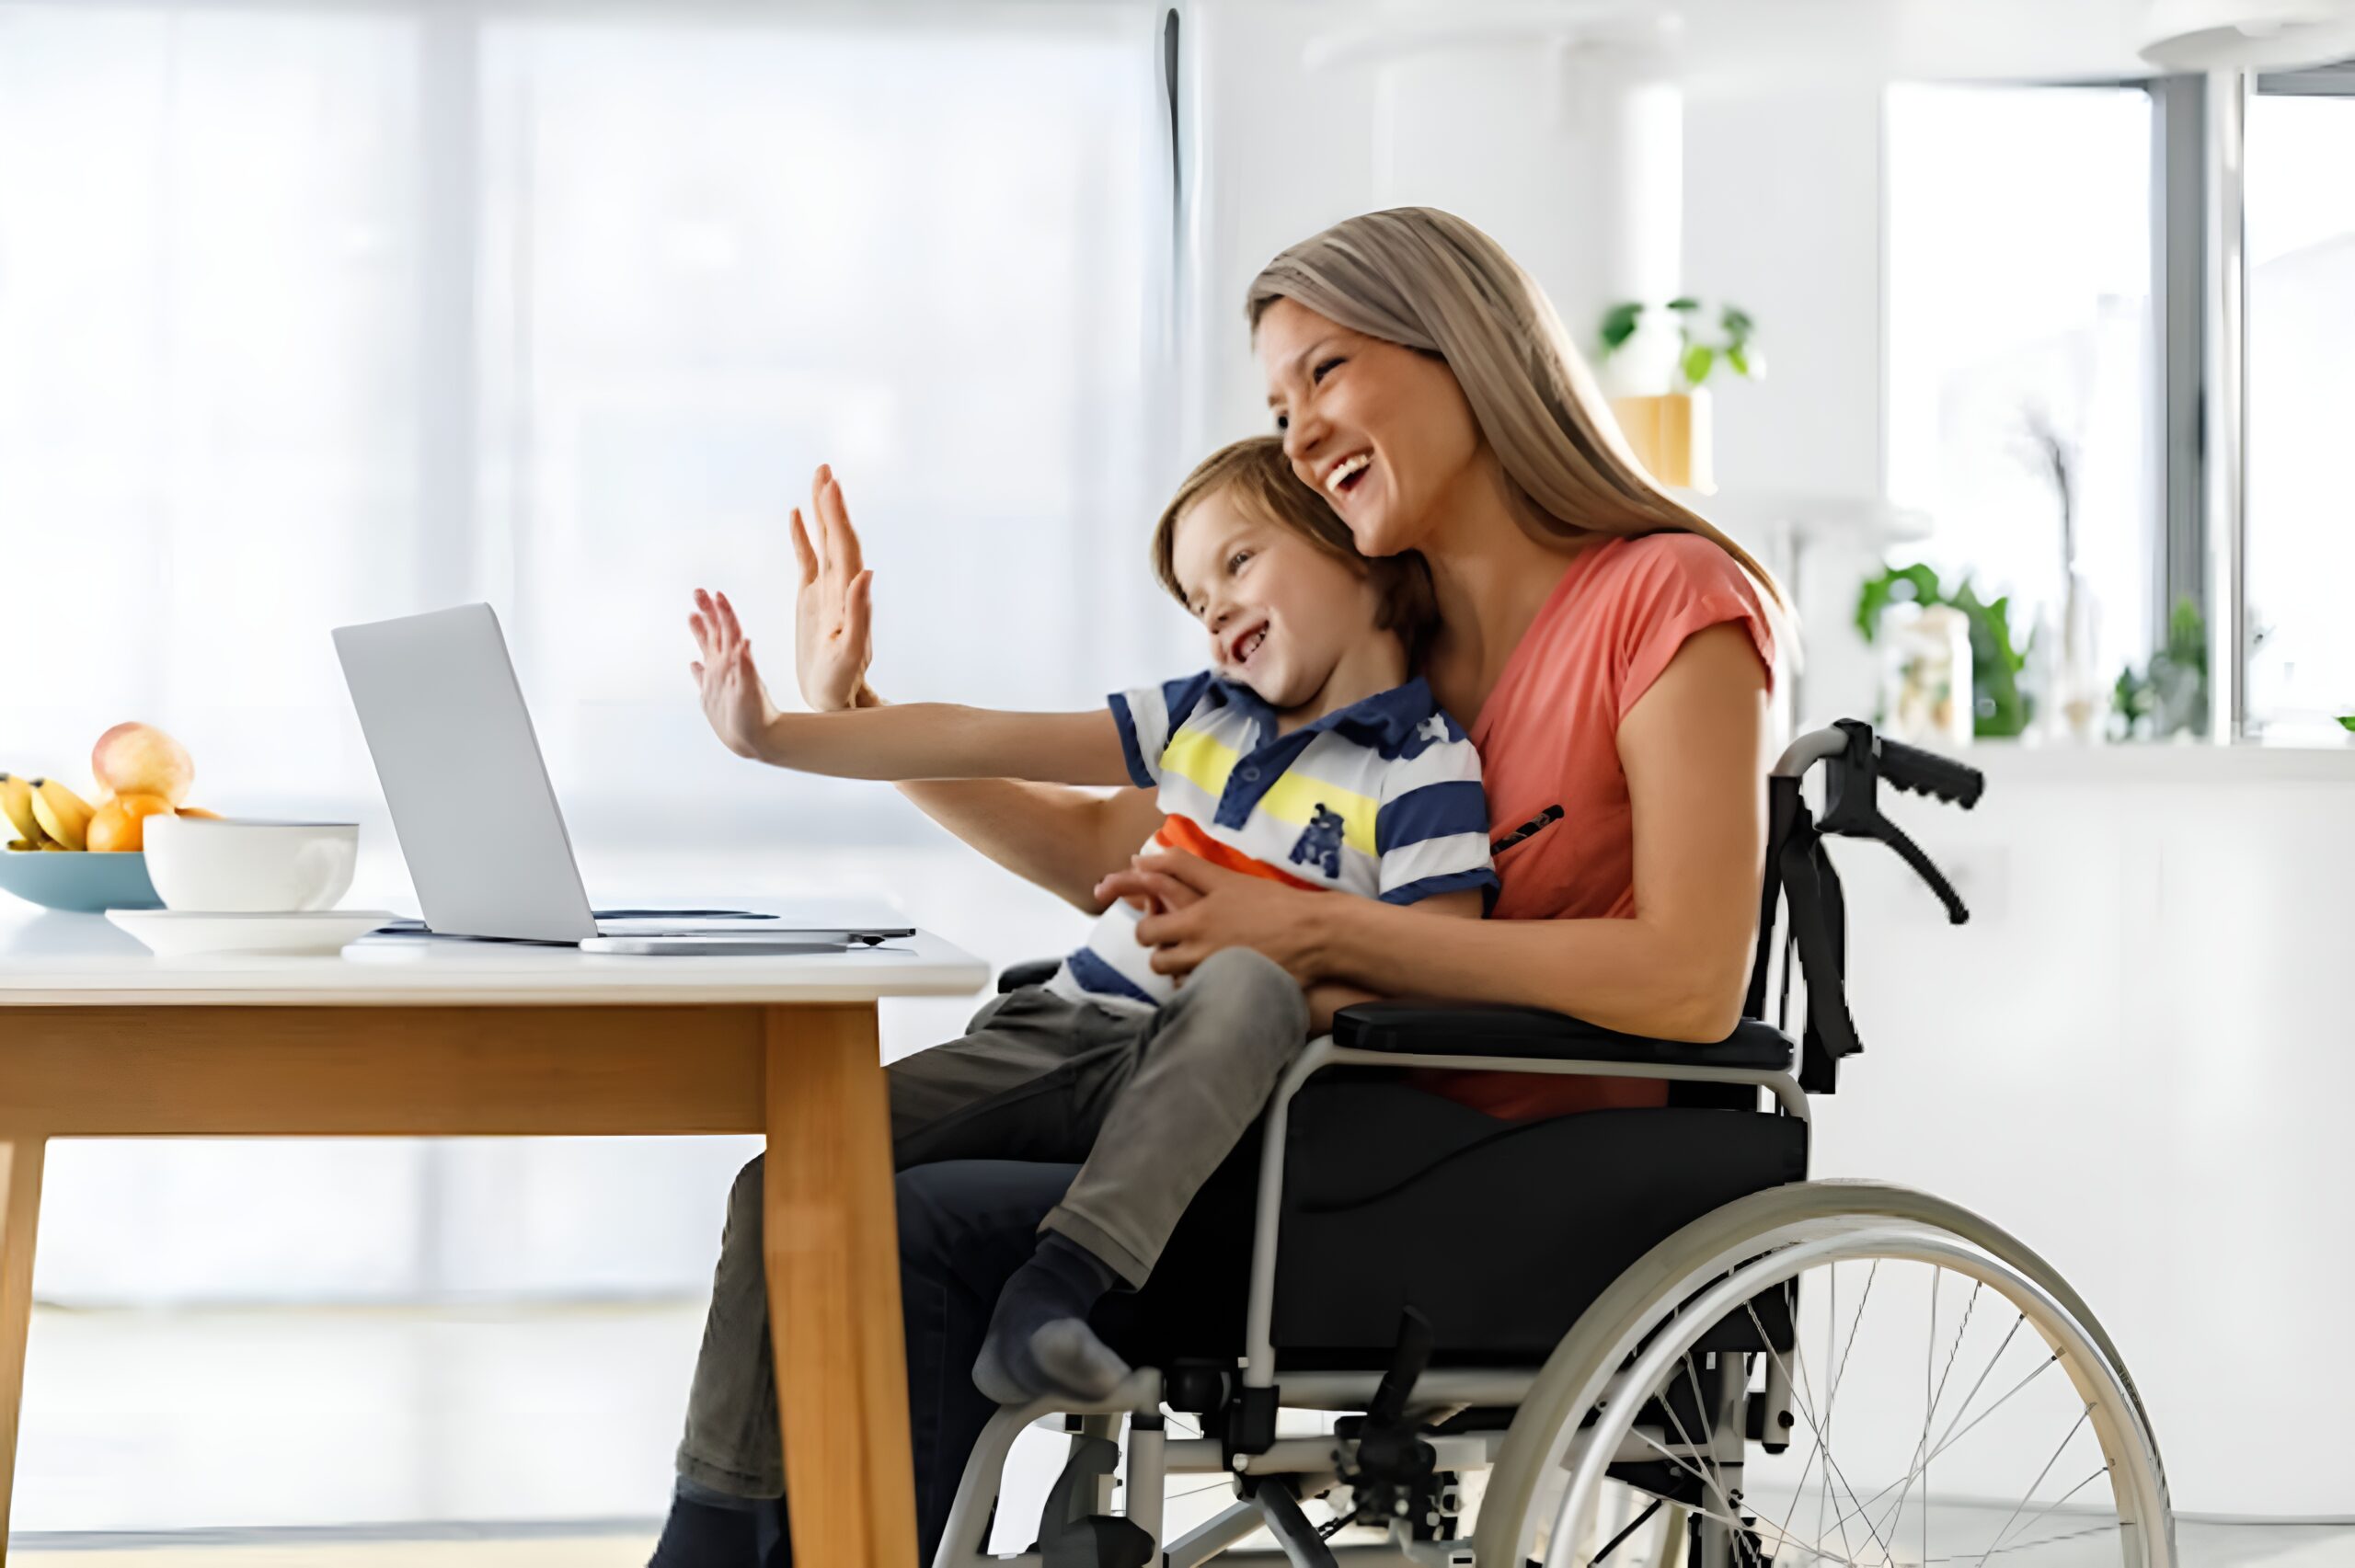 A person in a wheelchair with a toddler in their lap. They are waving at a laptop in front of them which suggests they might be on a video call.